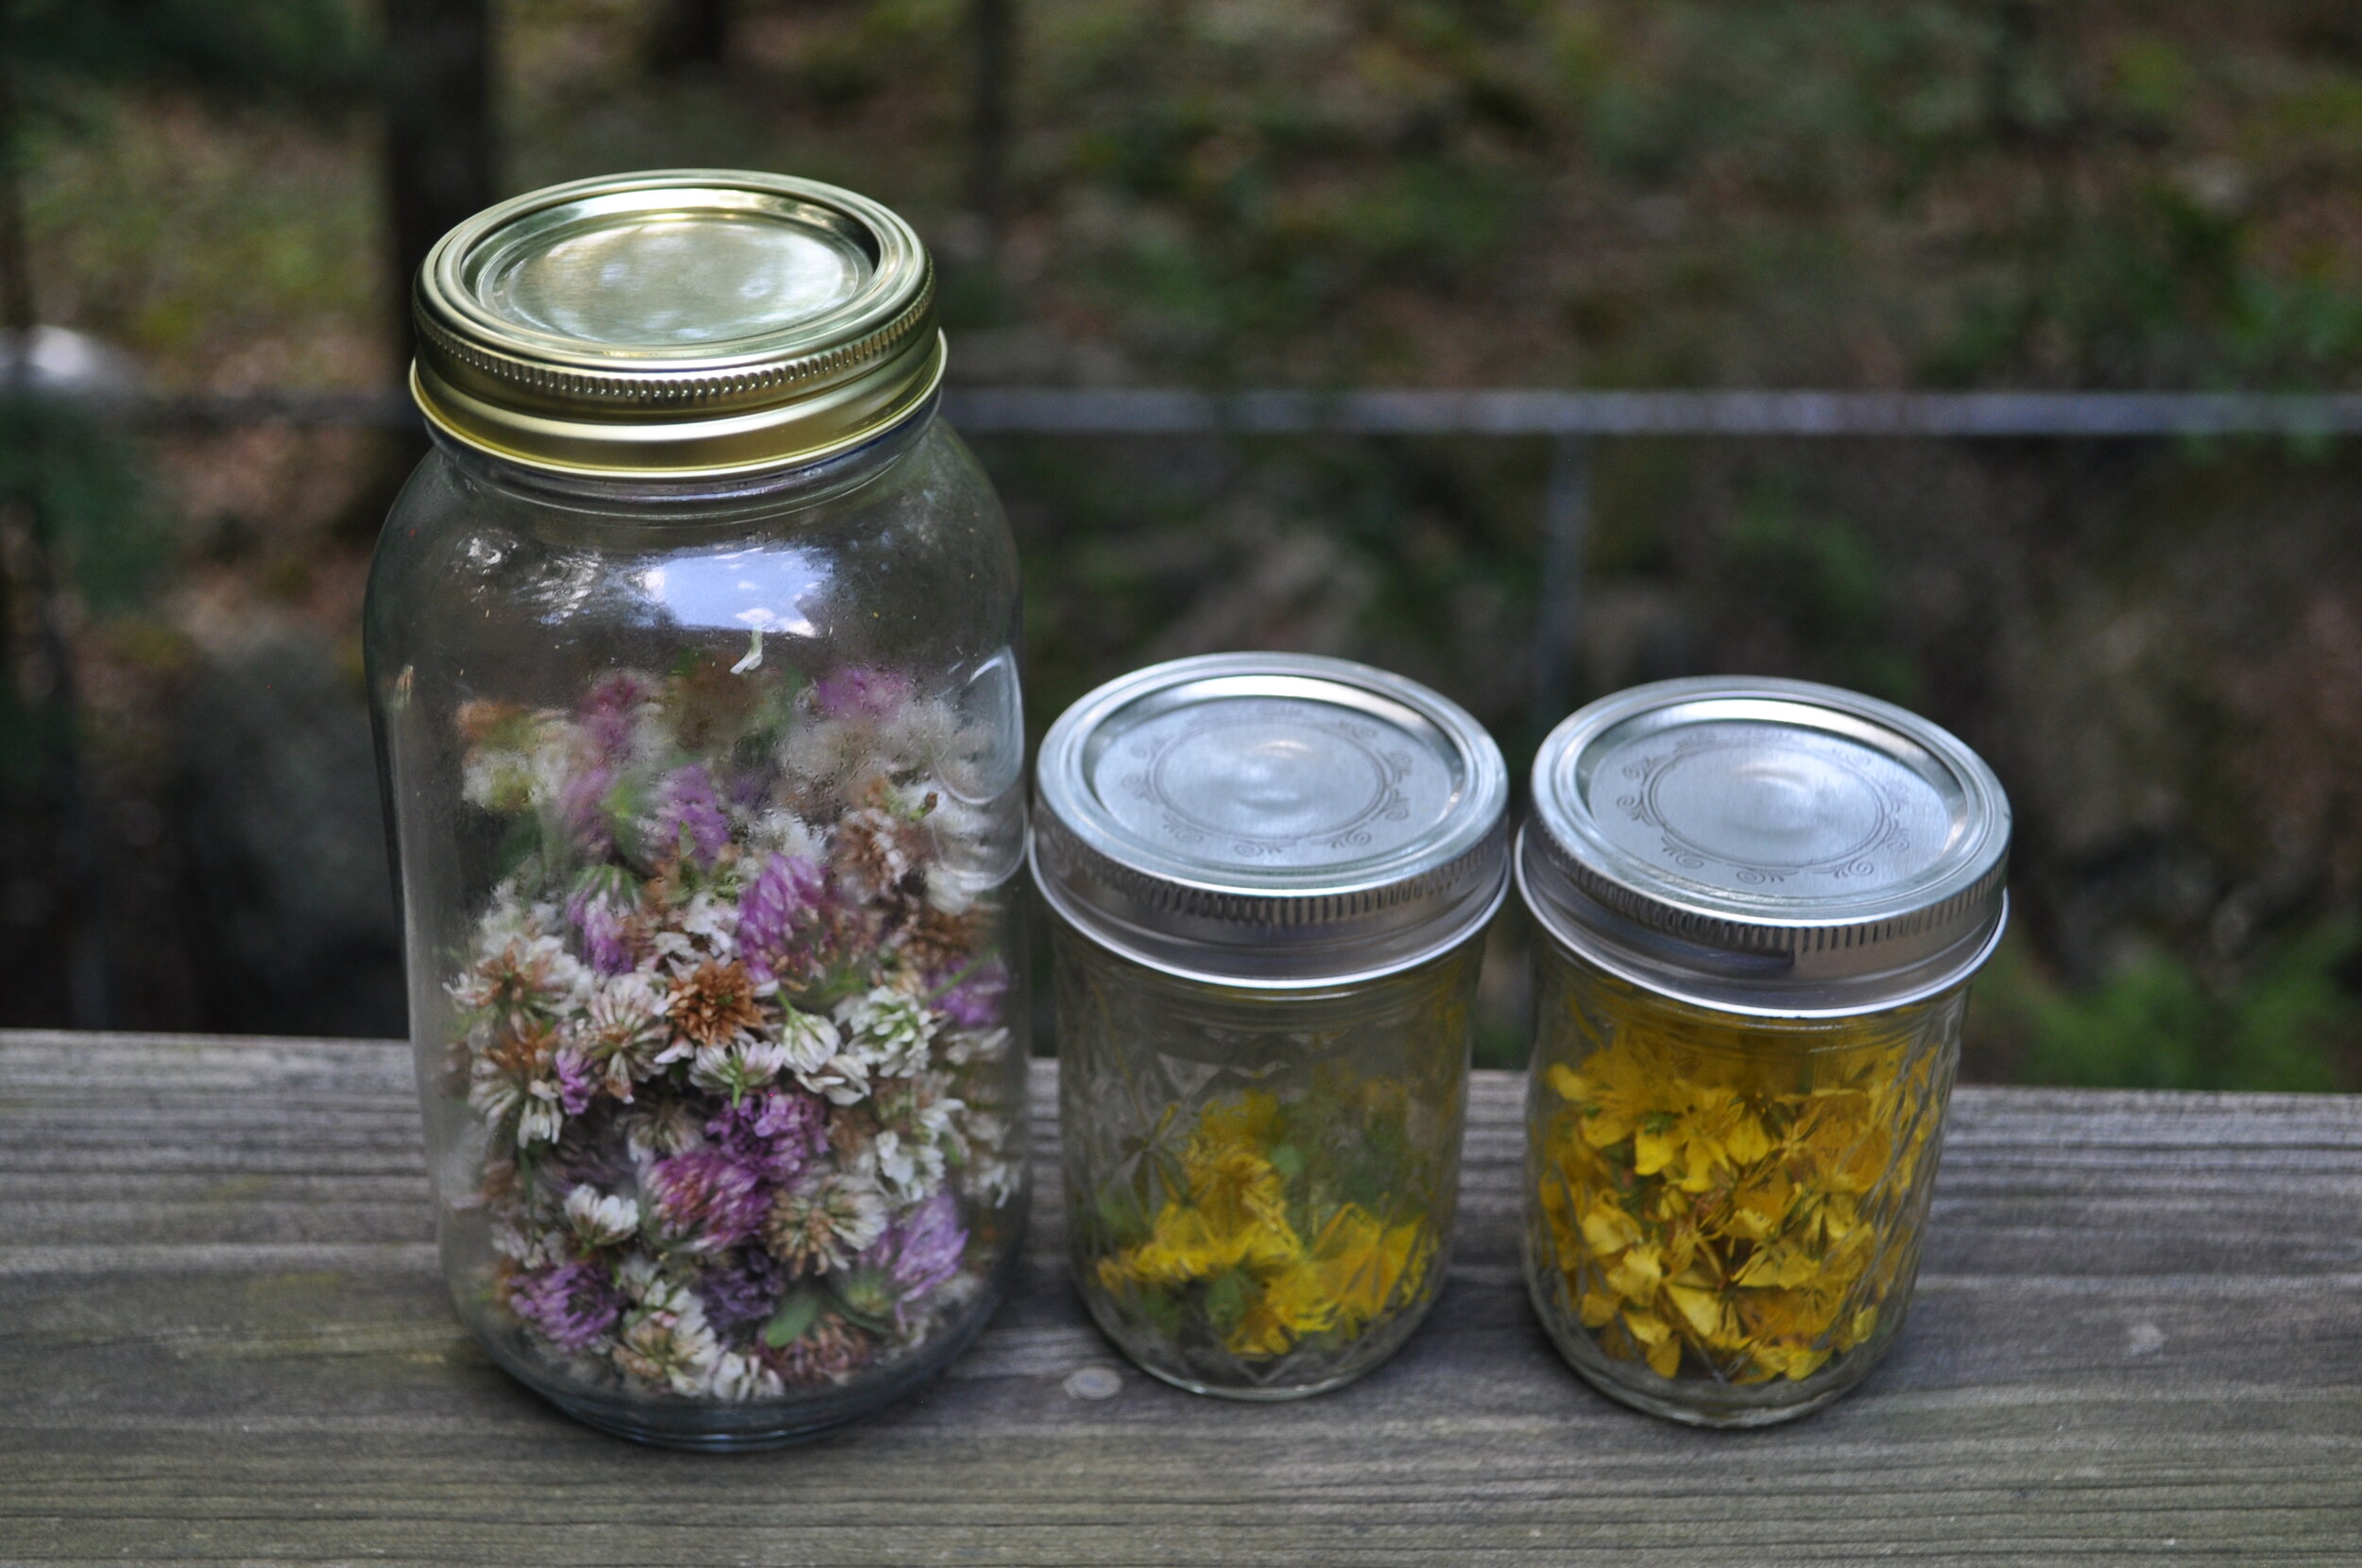 Foraging for wildflowers to use in tea. Photo by Kaia Waxenberg